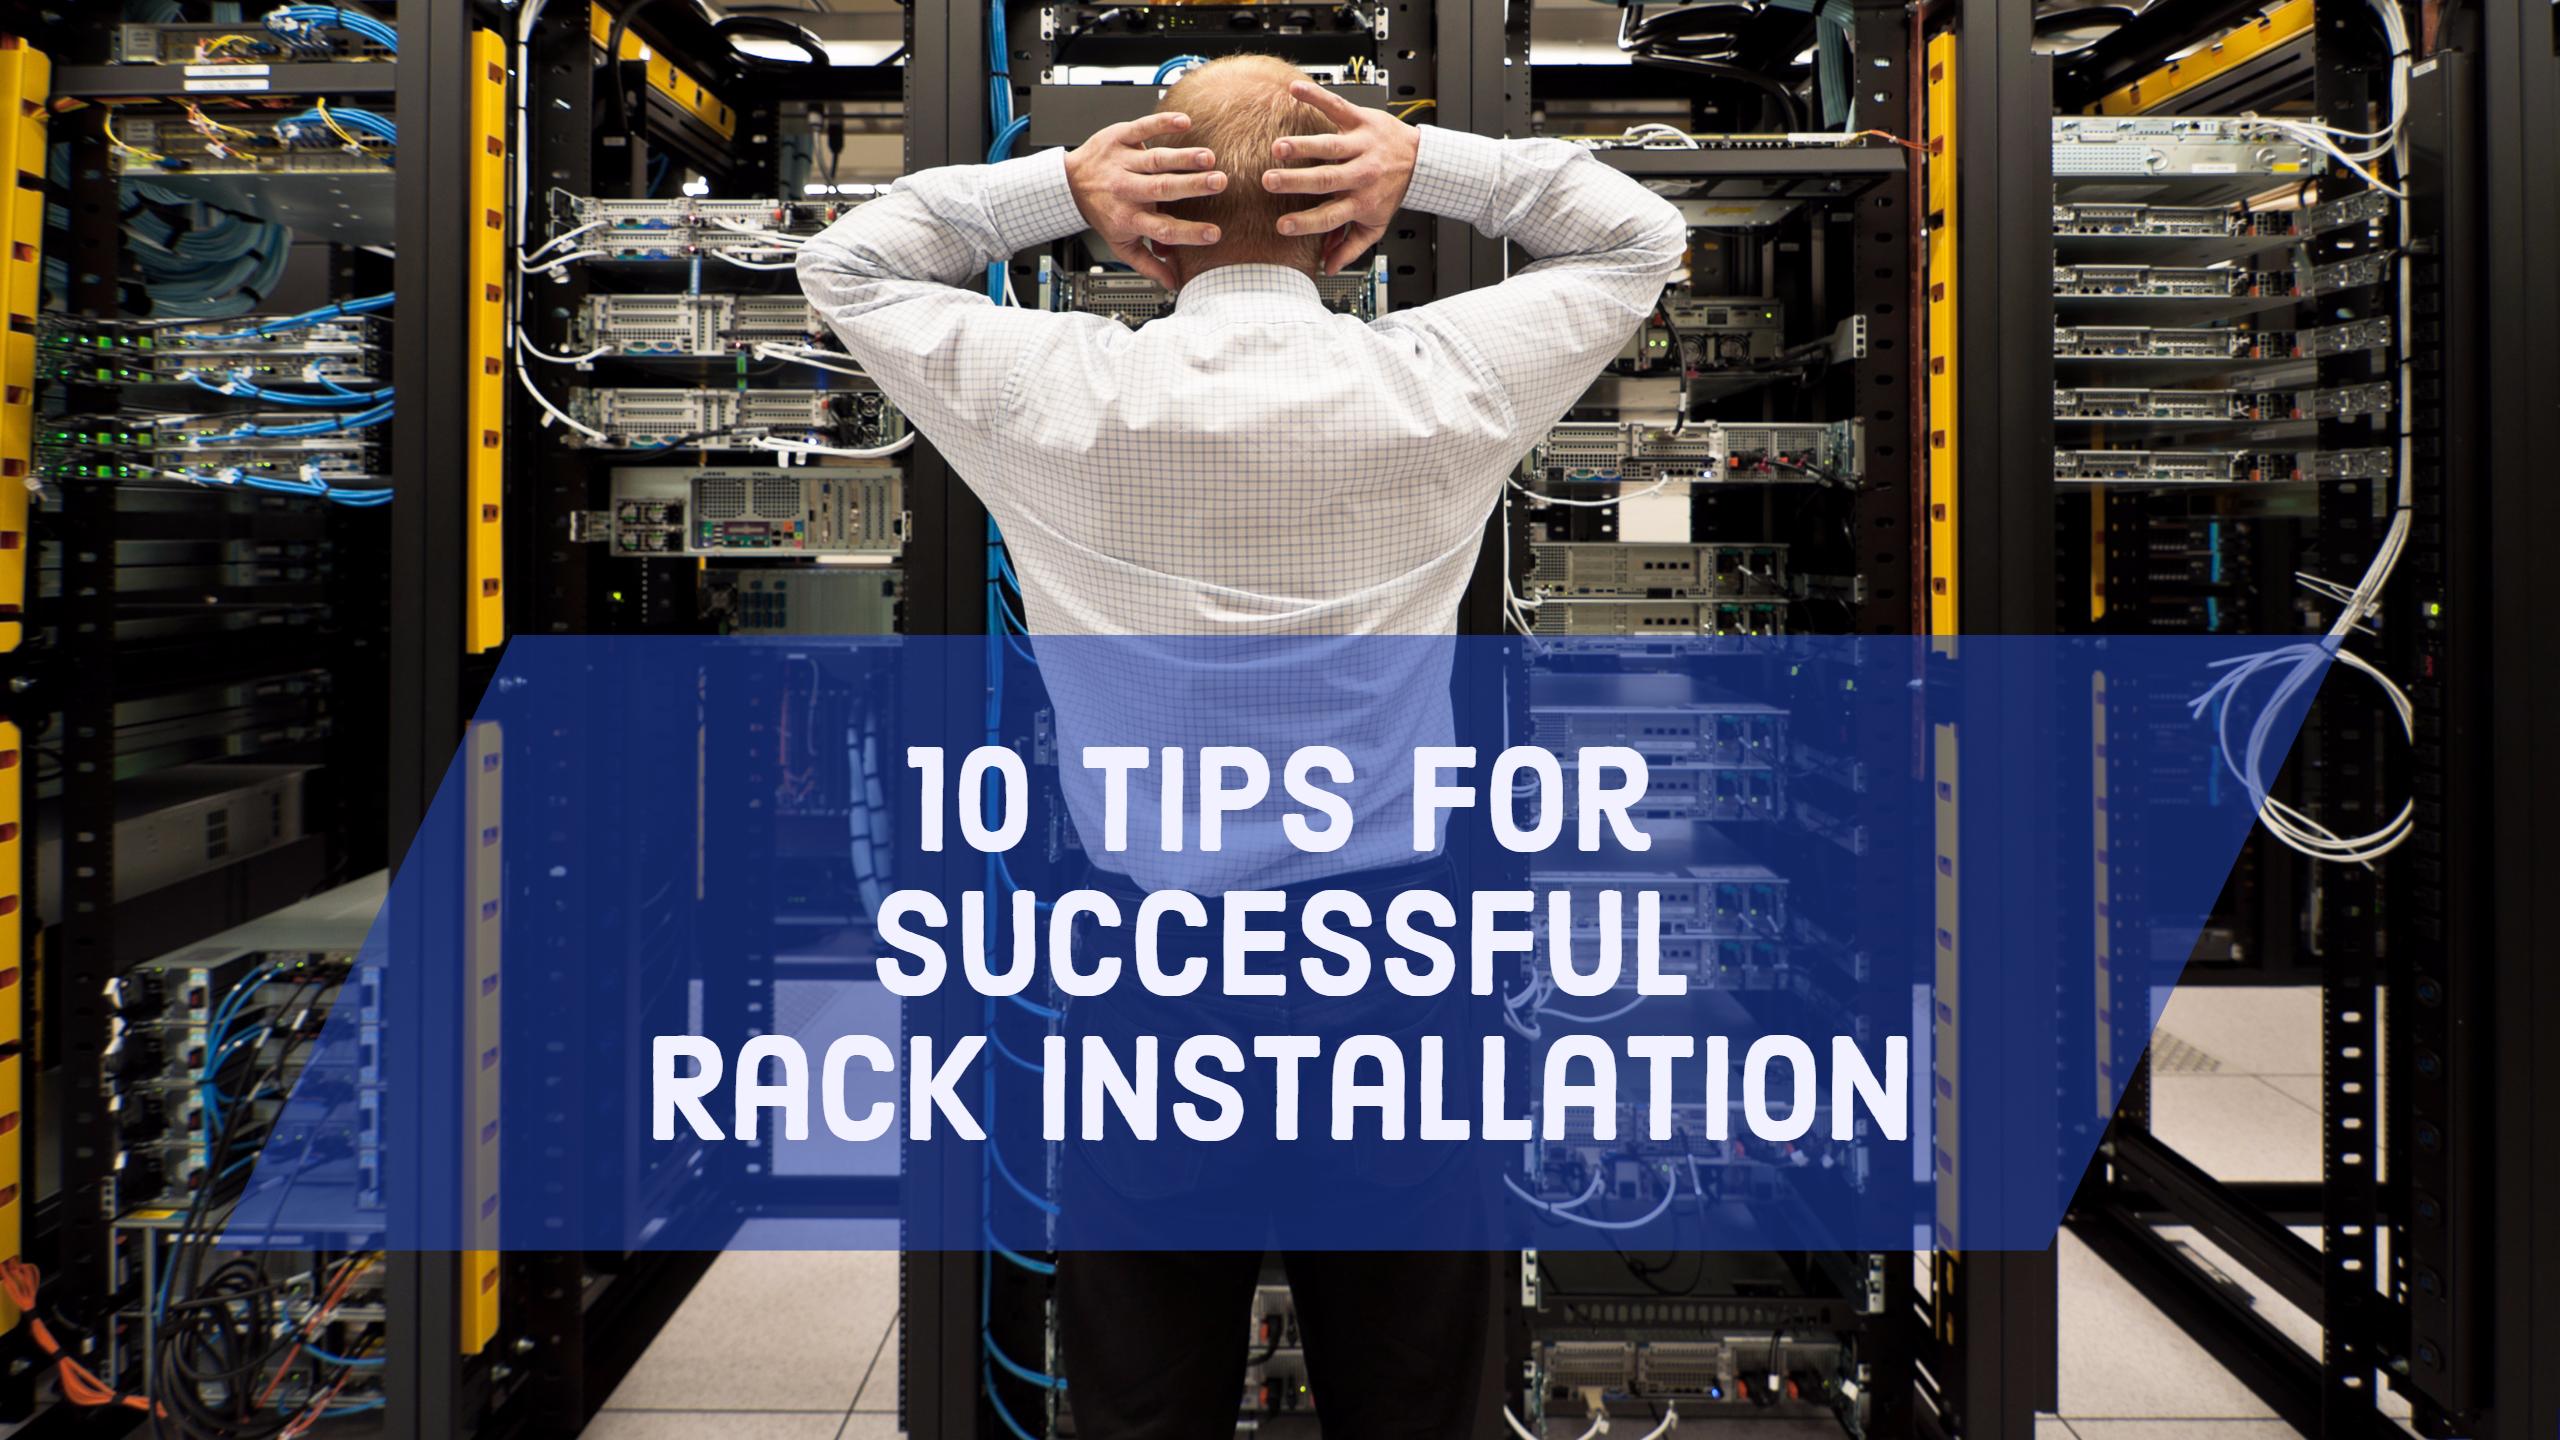 10 Tips for Successful Server Rack Installation